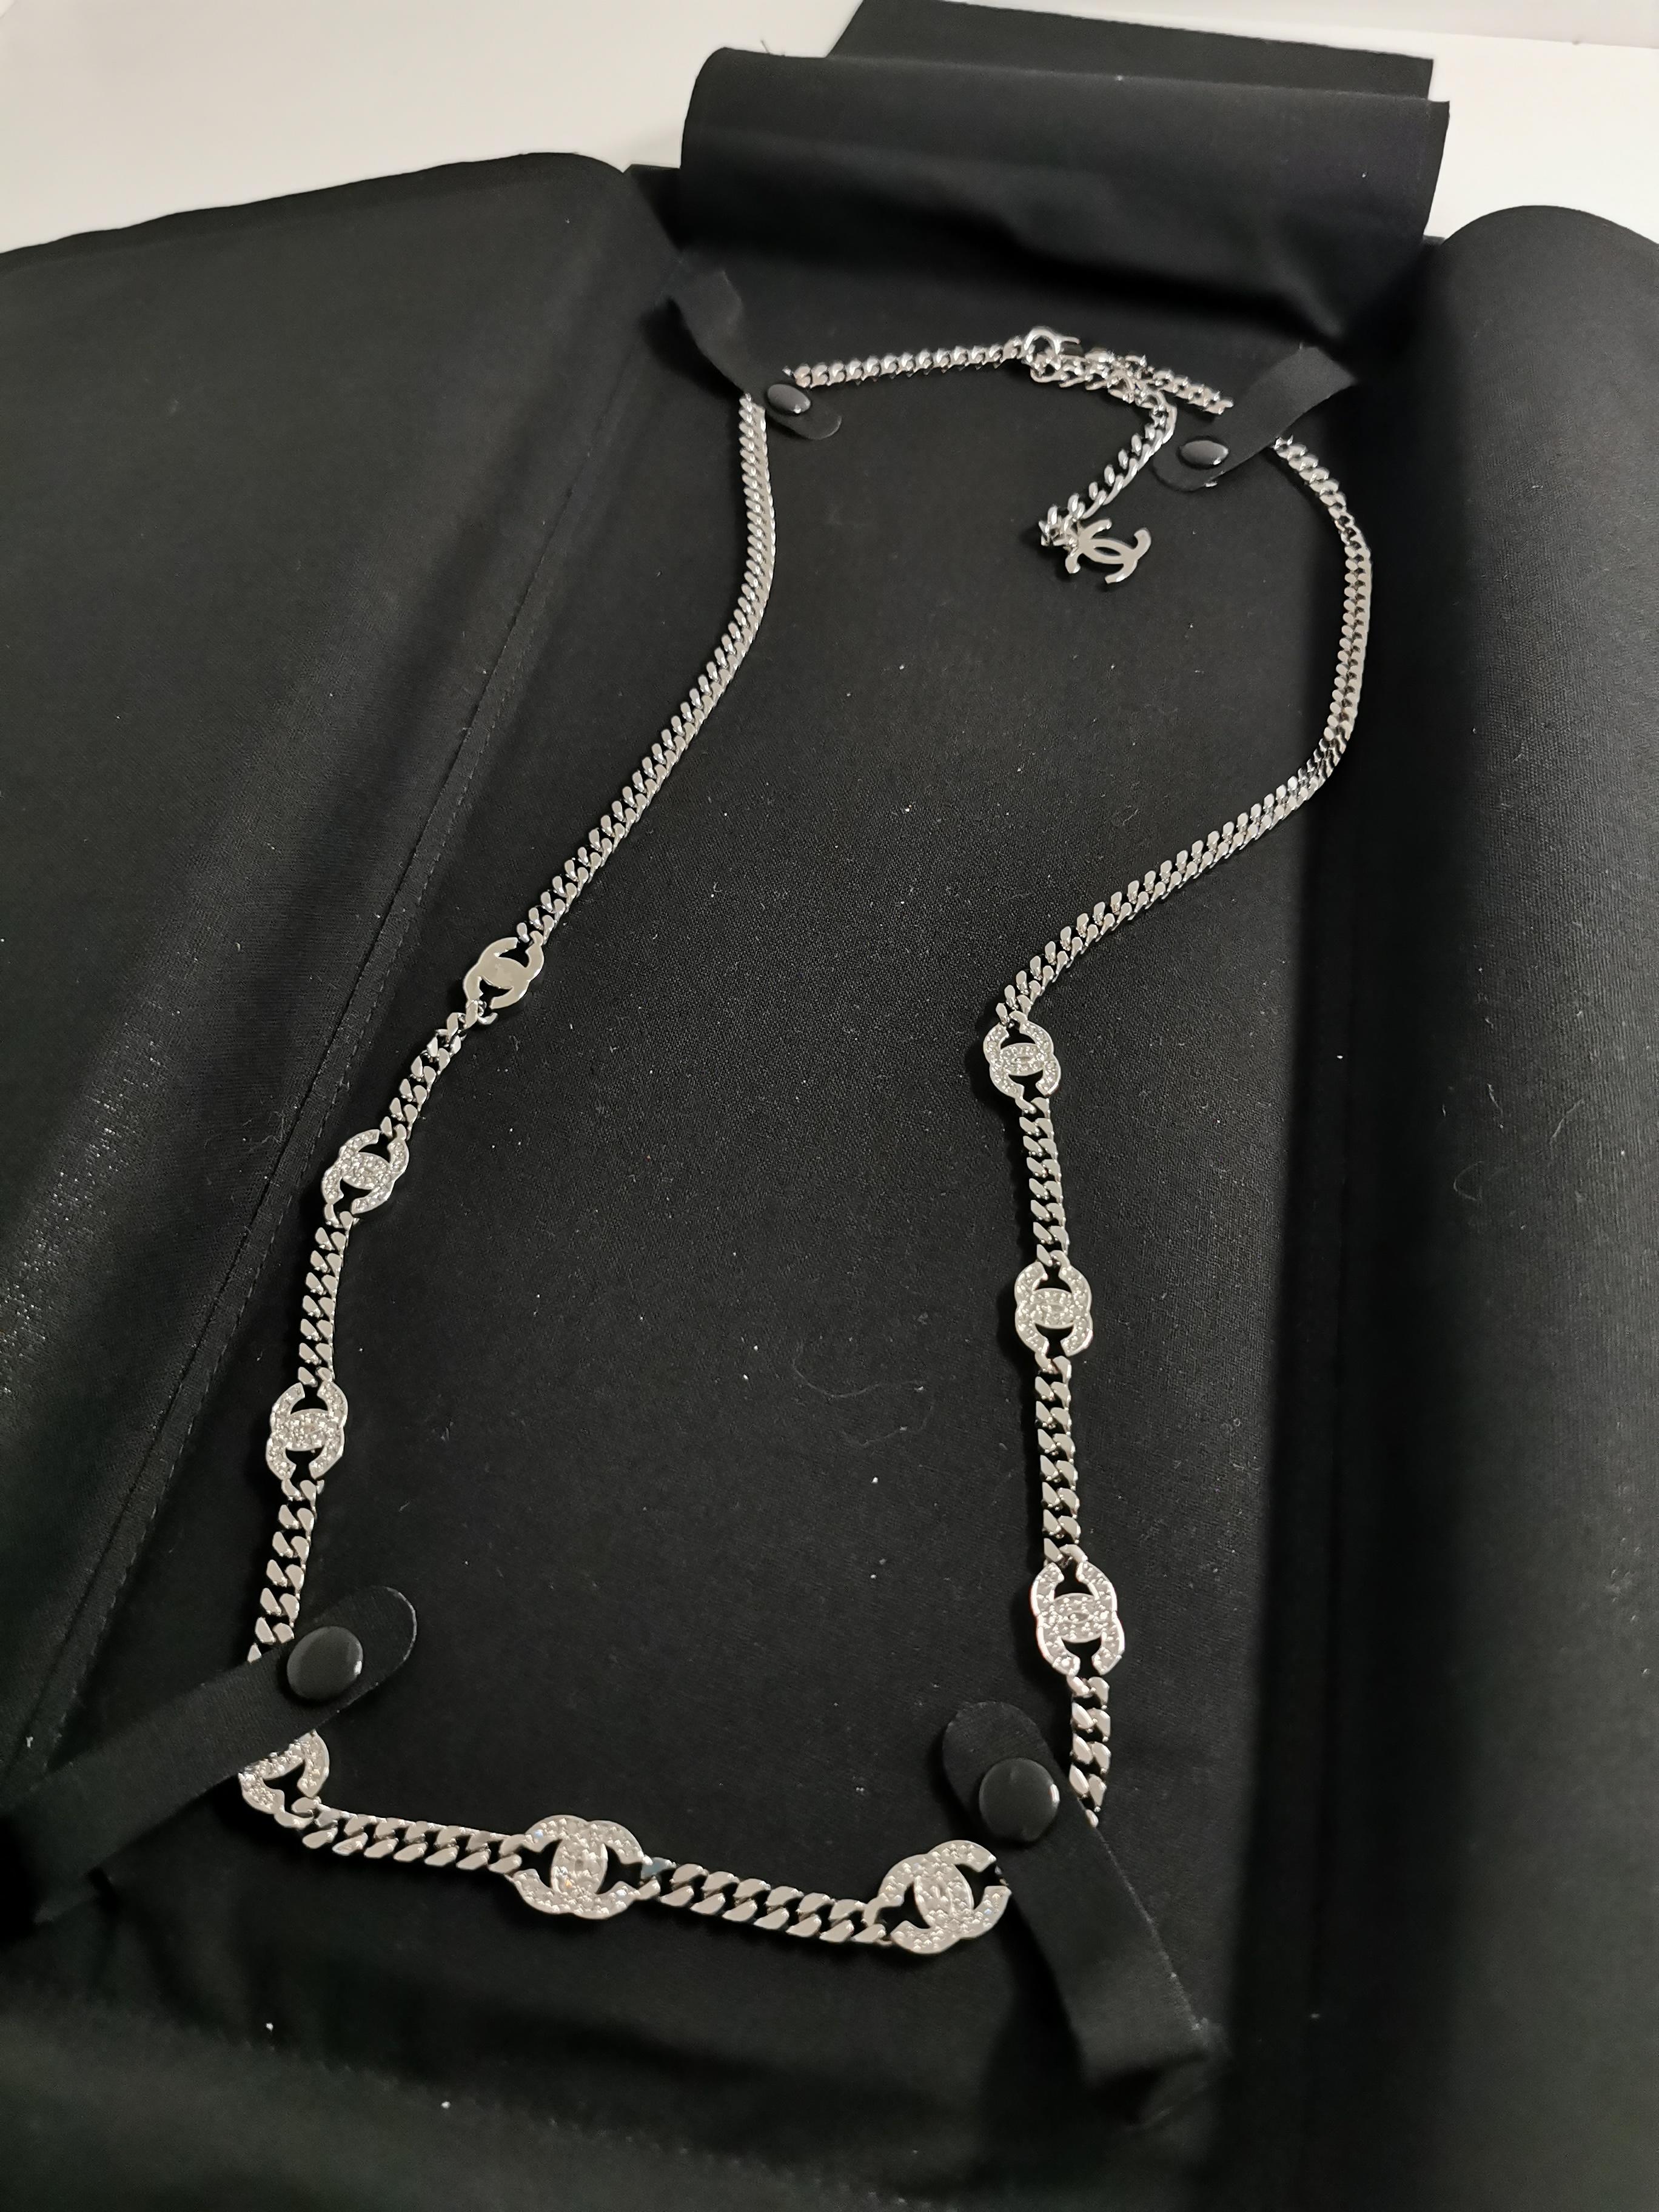 Elevate your style to the pinnacle of luxury with the Chanel 2021 CC Rhinestones Chain in Gunmetal Silver, a versatile piece that effortlessly transforms into a stunning waist chain or an exquisite necklace. This creation by the iconic fashion house